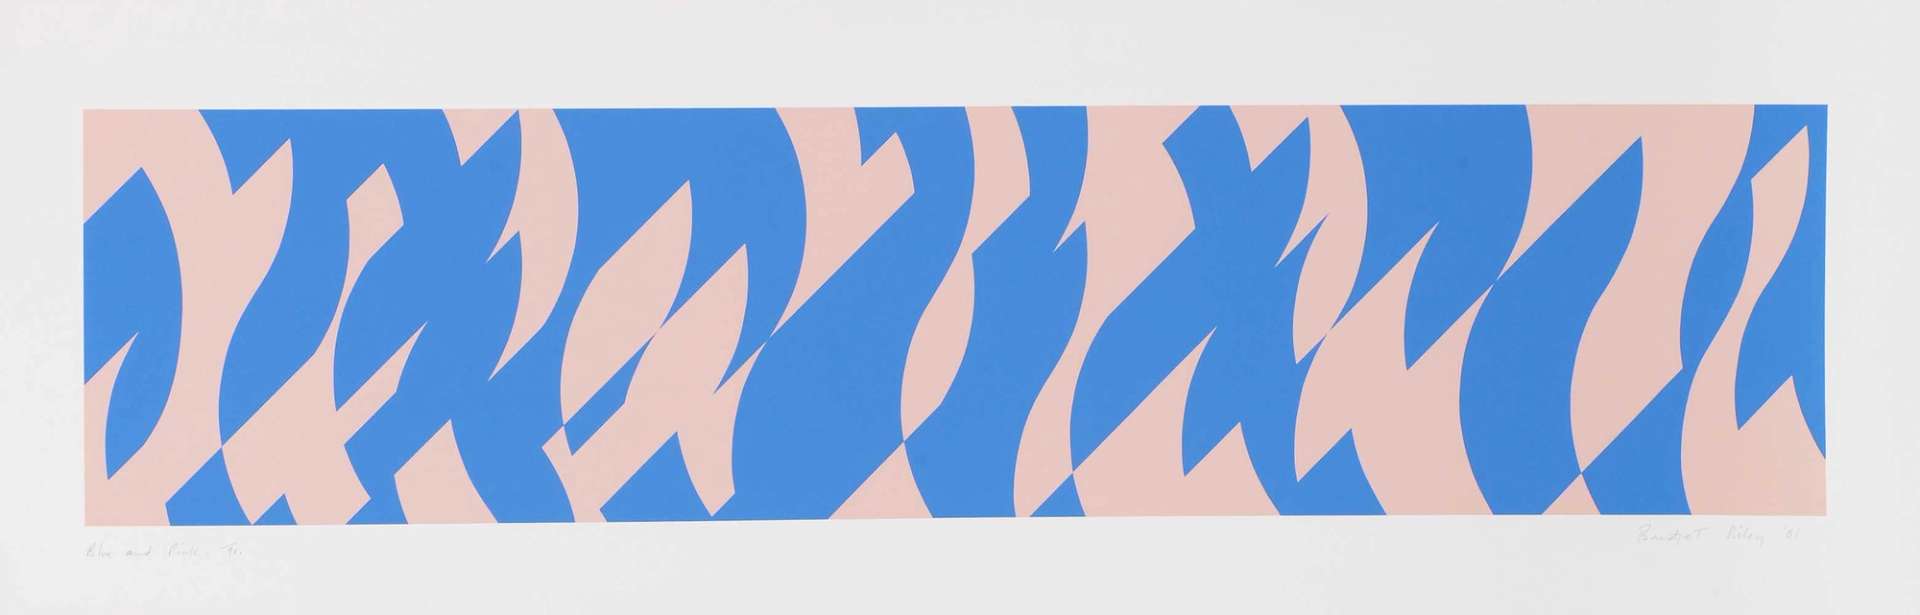 Bridget Riley: Blue And Pink - Signed Print